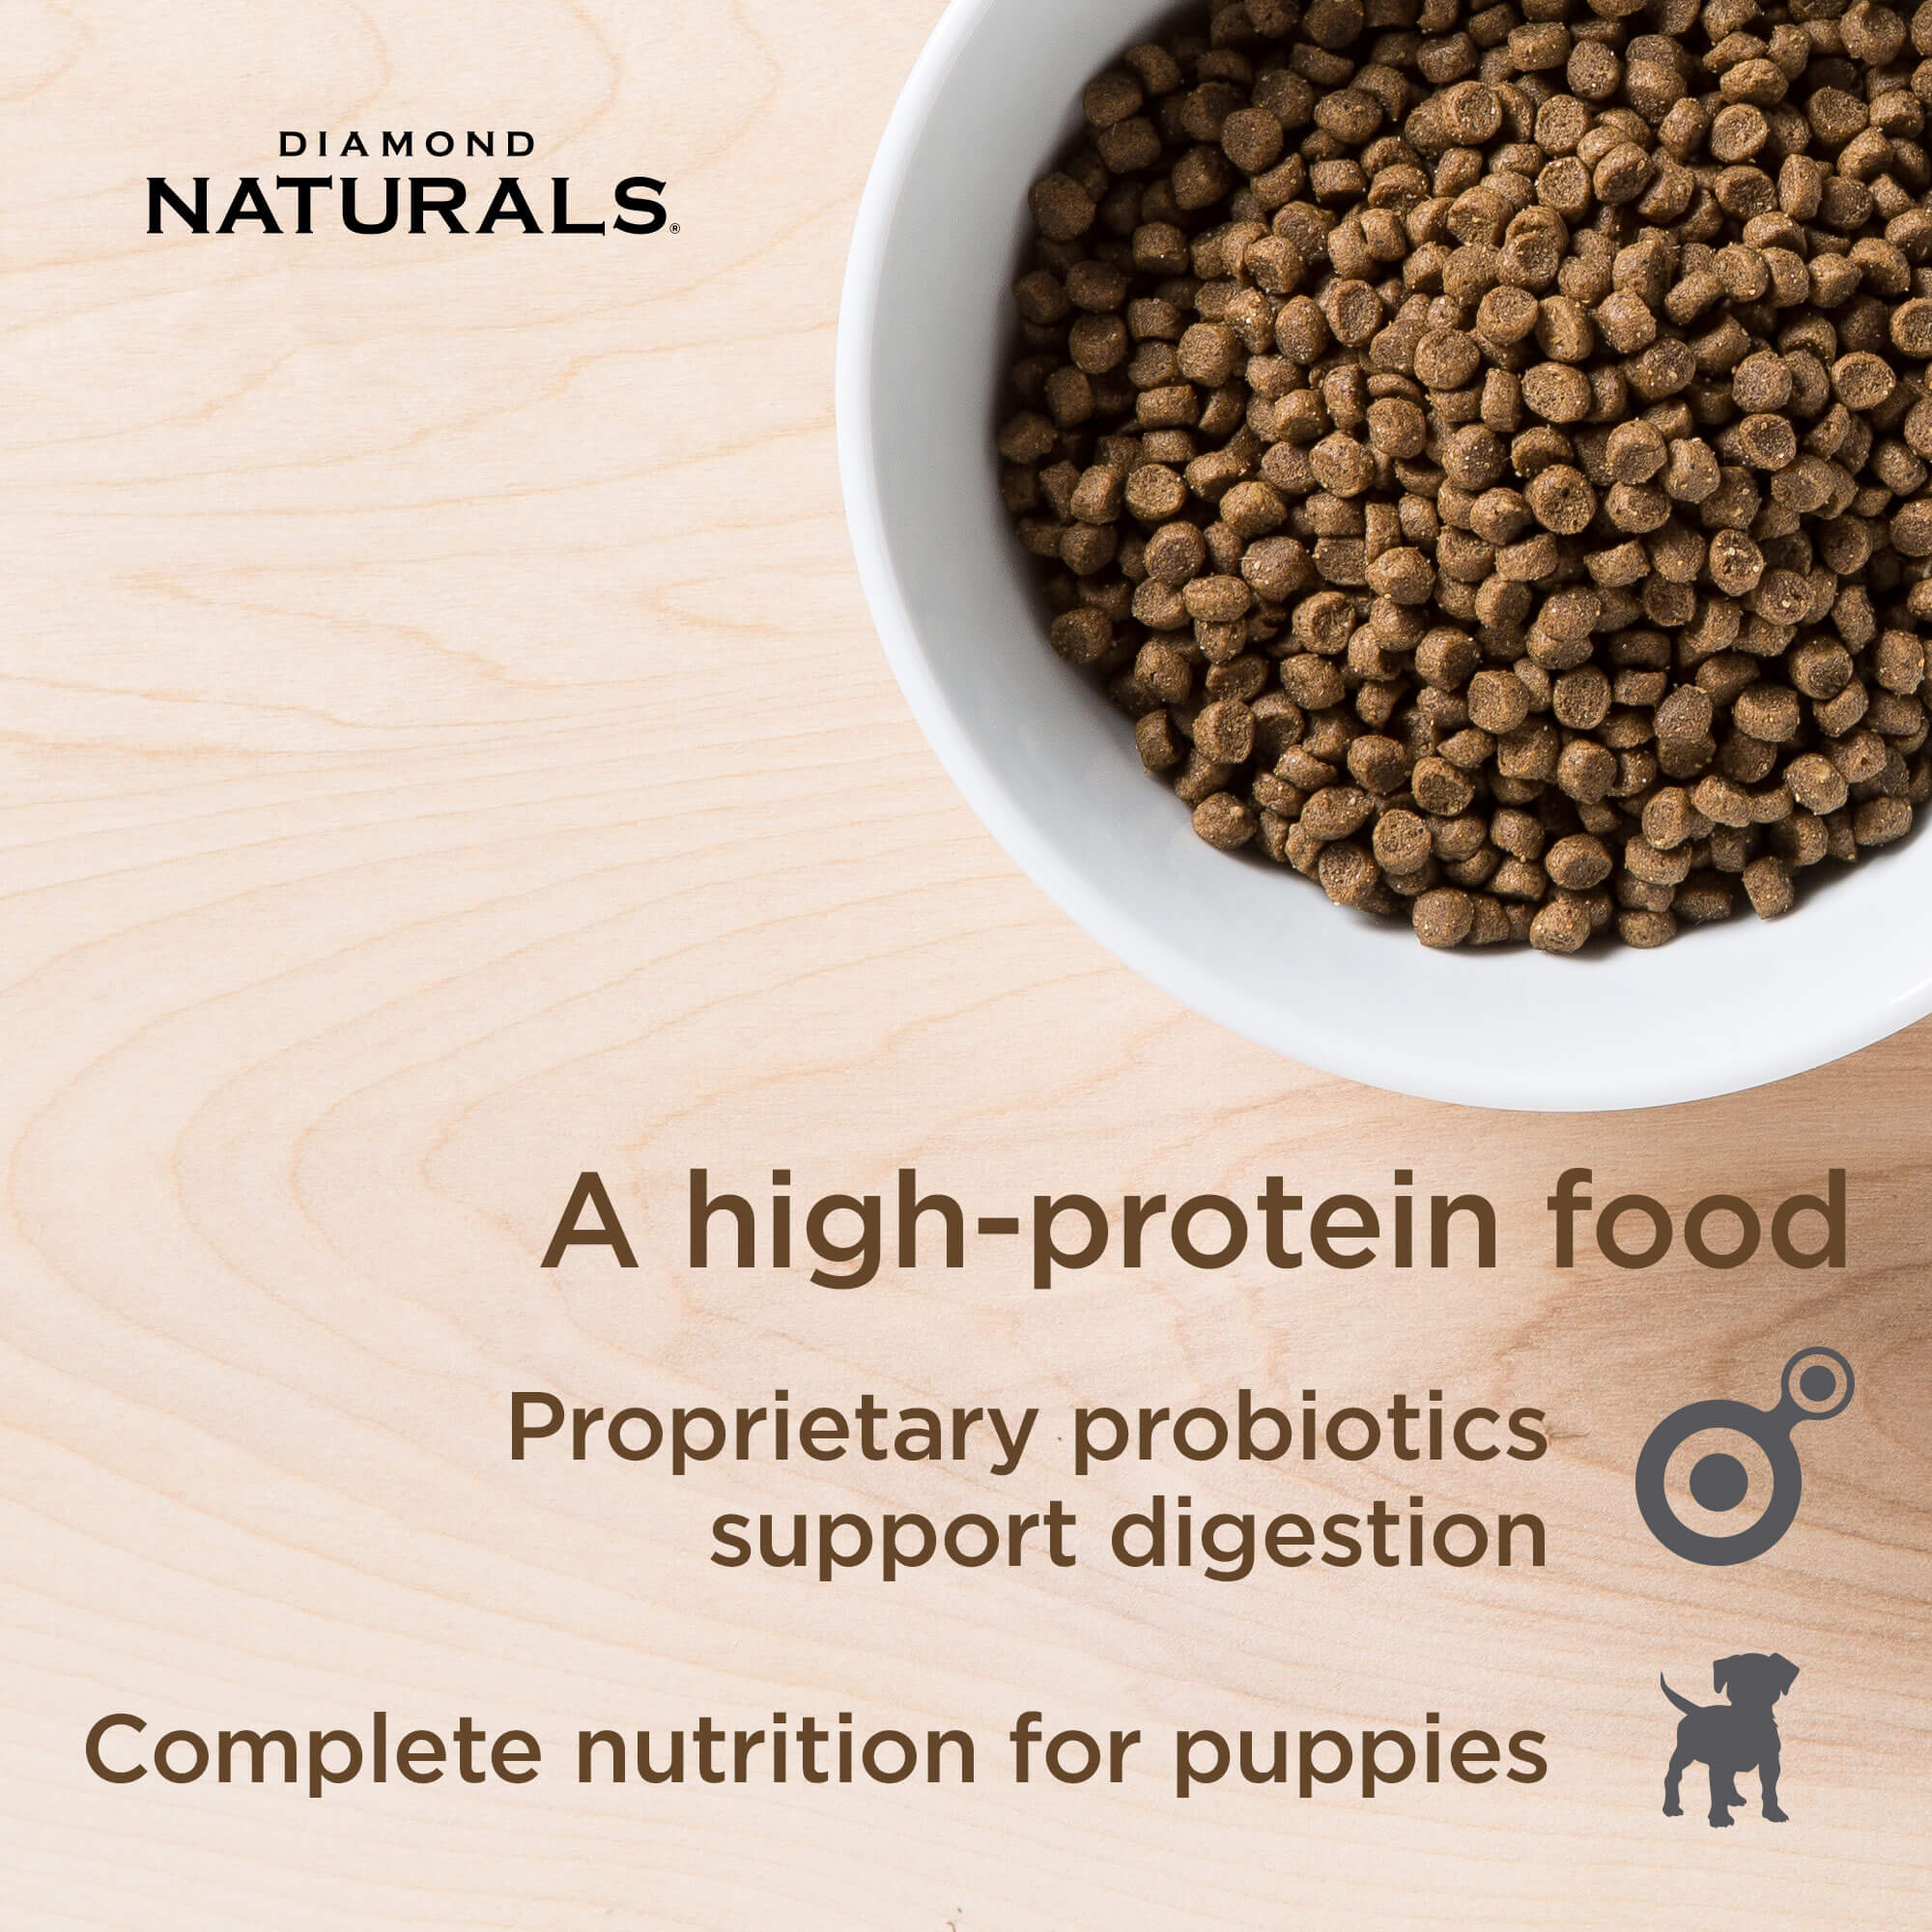 Diamond Naturals Small Breed Puppy A high-protein food